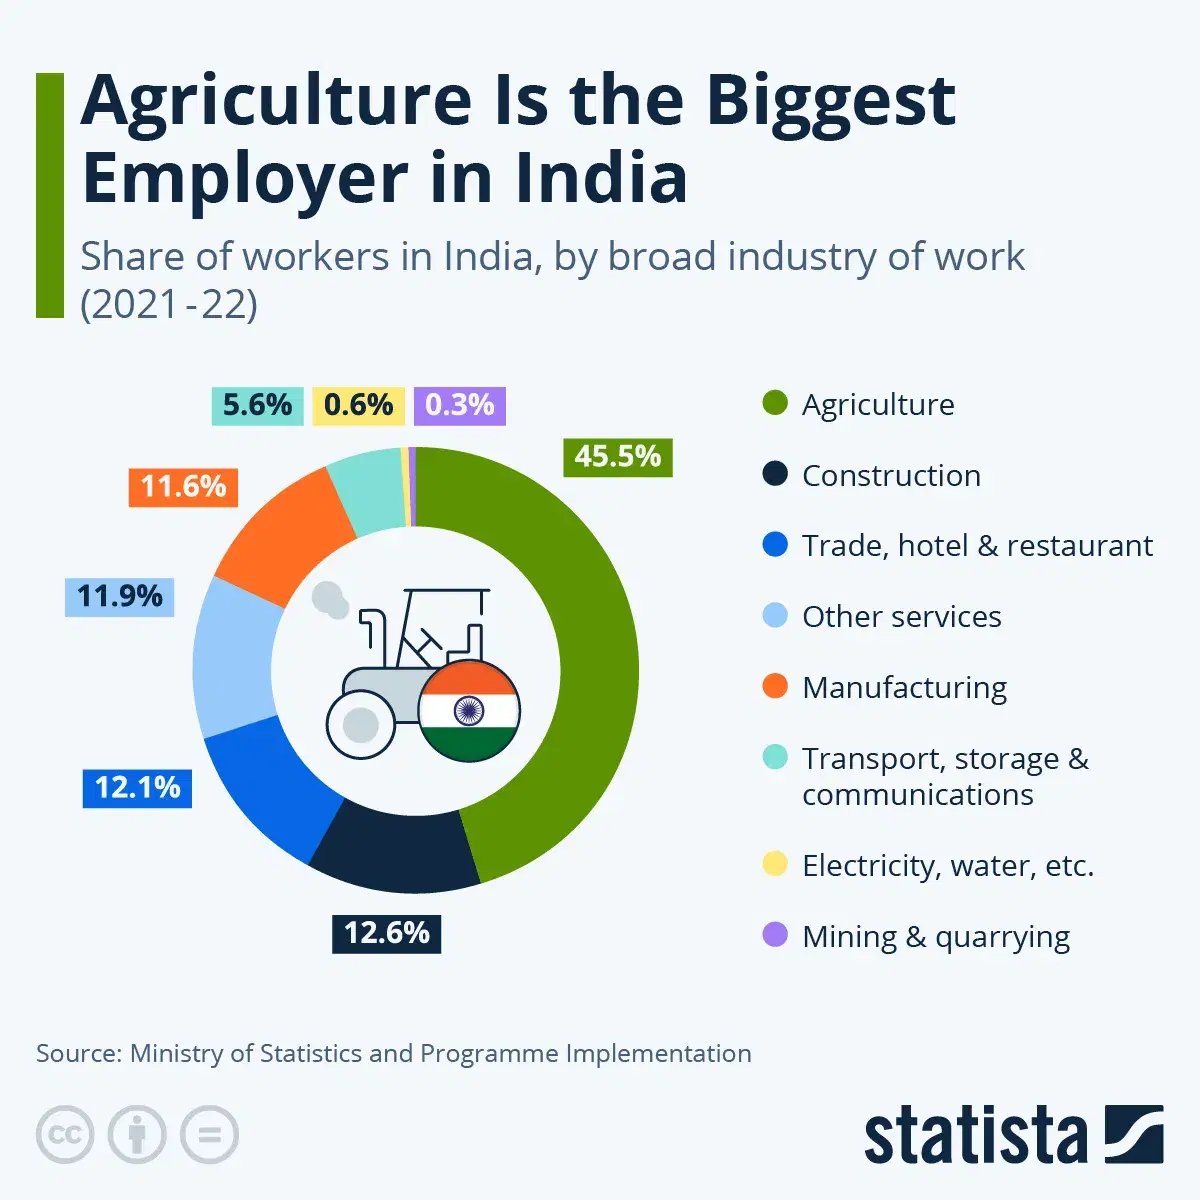 Agriculture Is the Biggest Employer in India